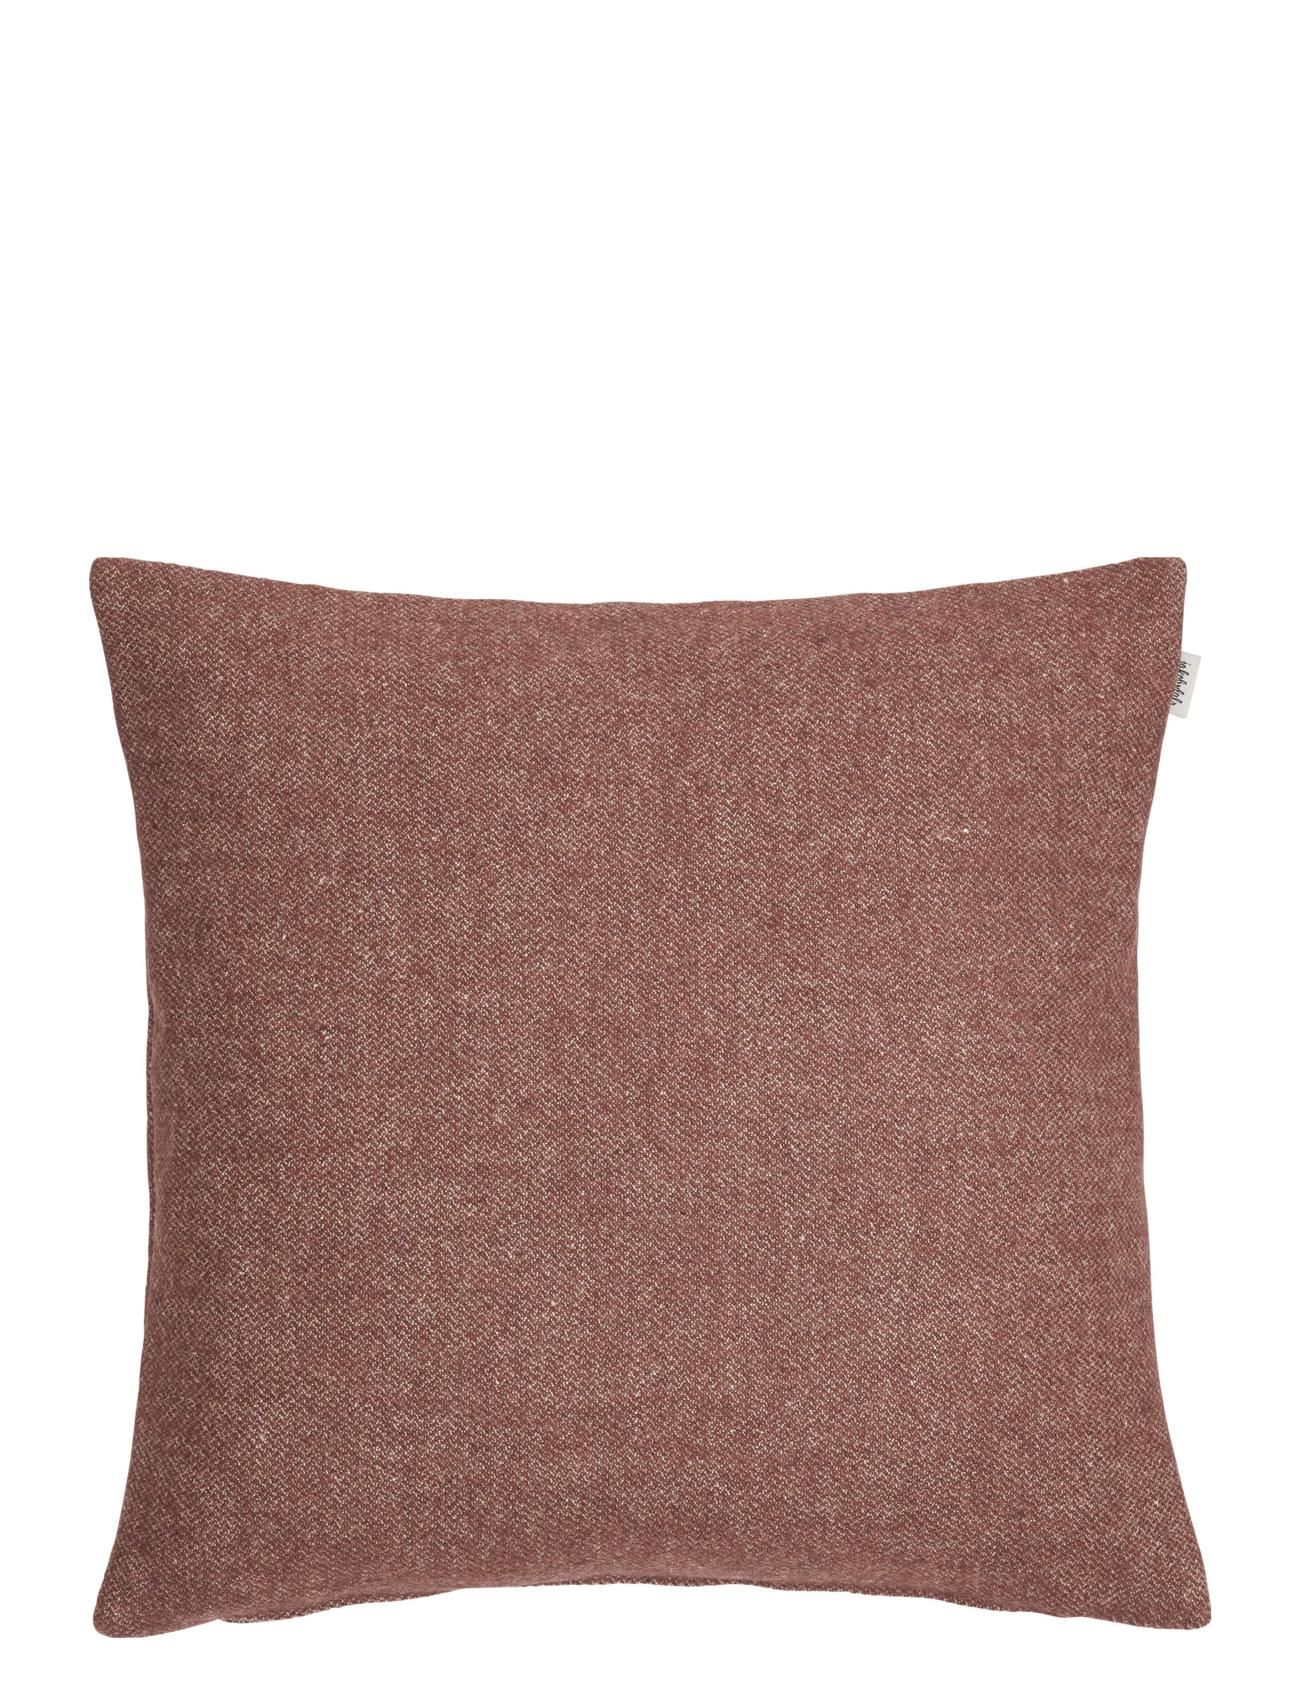 Jakobsdals Nordseter Wool Cushion Cover Home Textiles Cushions & Blankets Cushion Covers Rød Jakobsdals